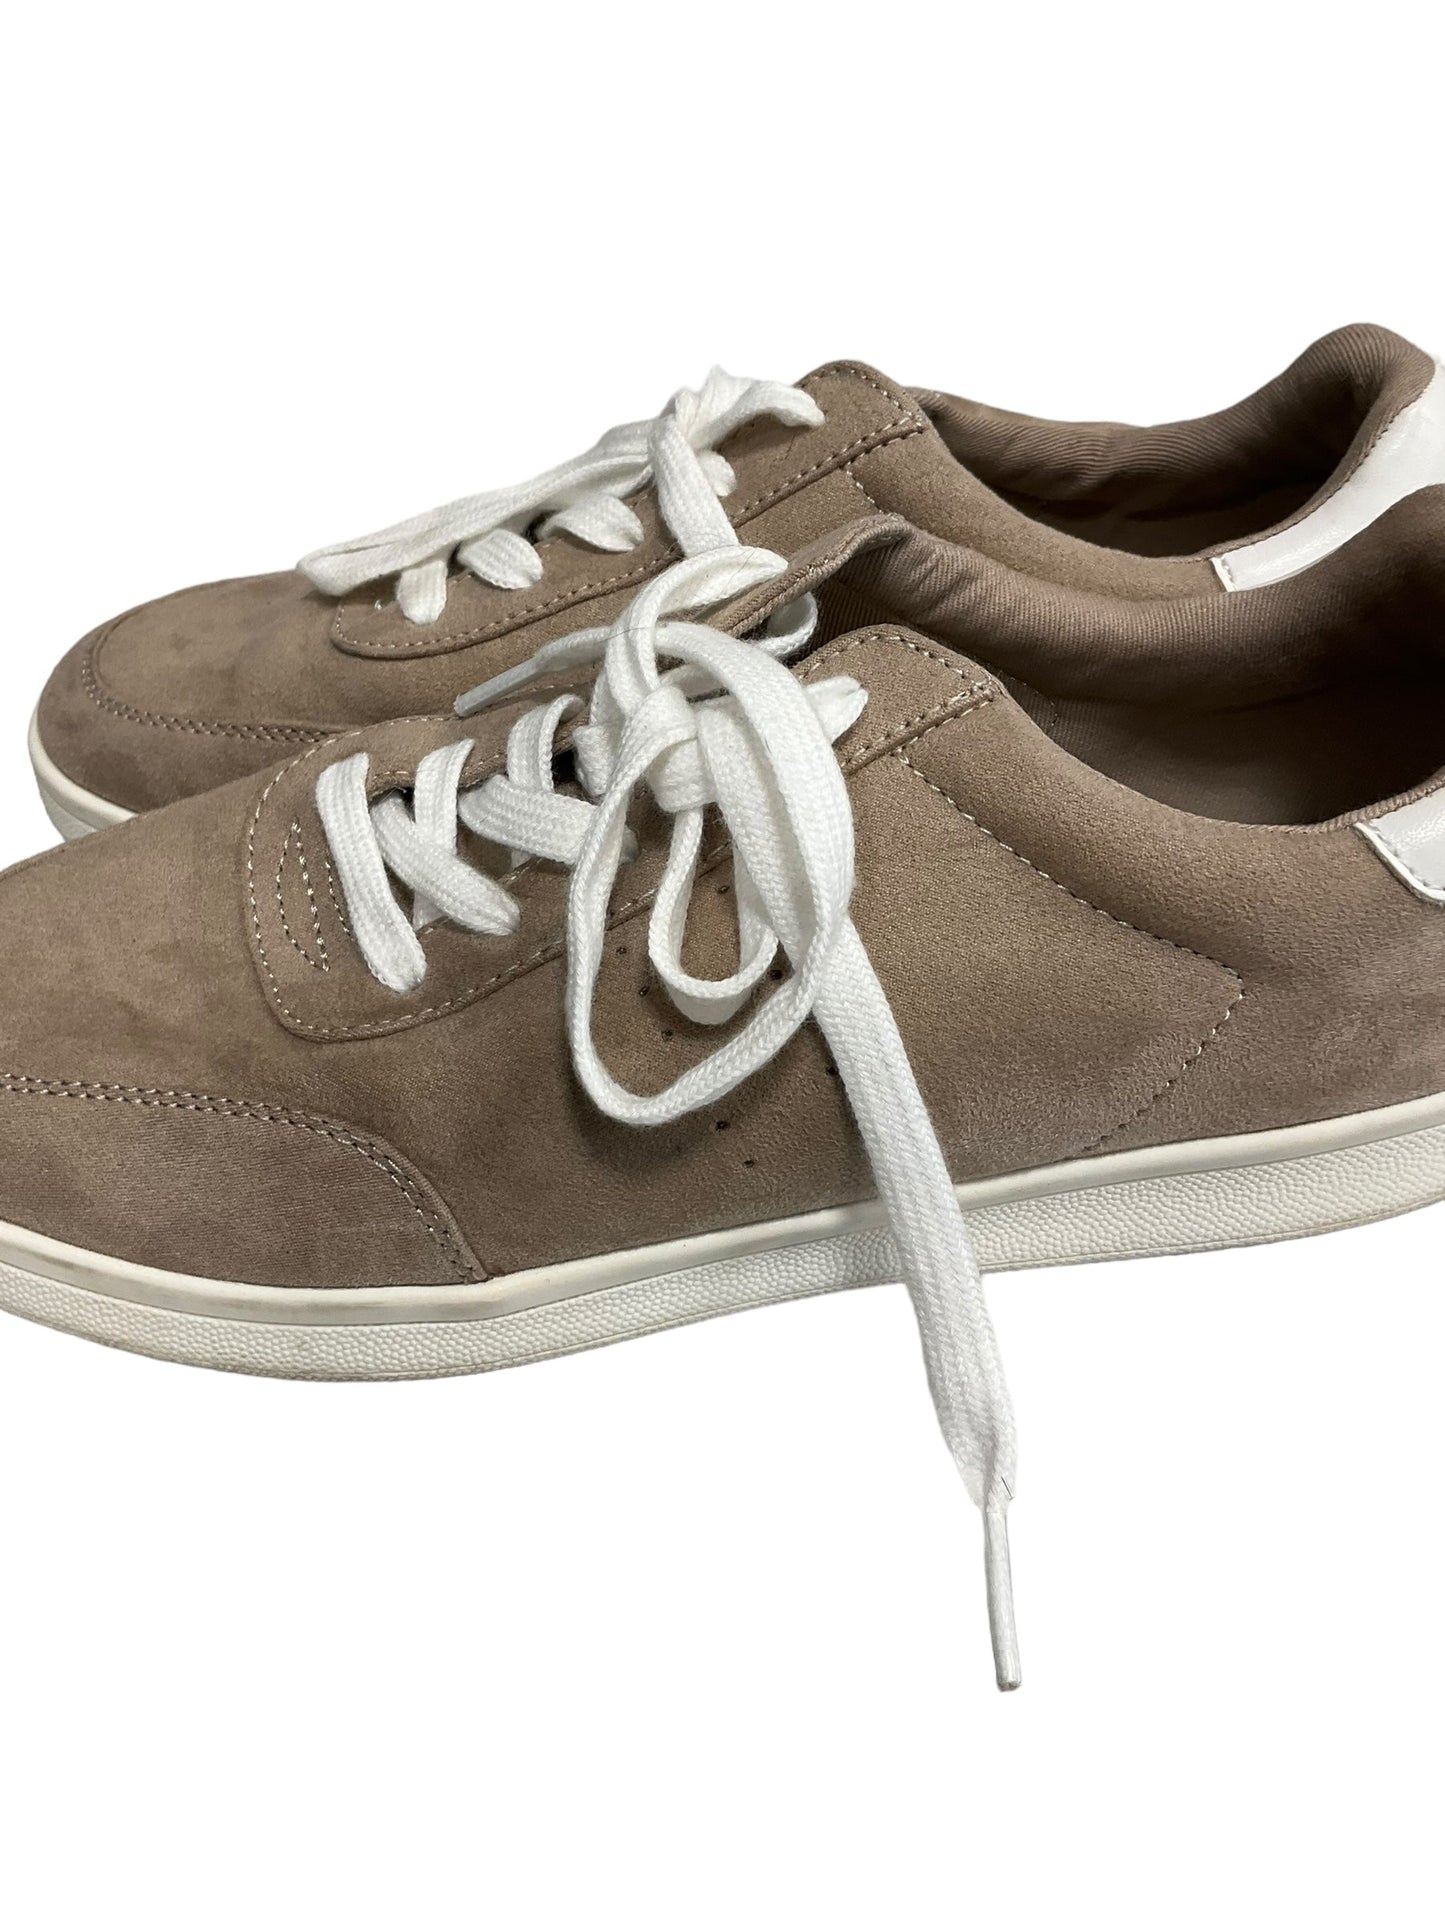 Tan Shoes Sneakers Old Navy, Size 9